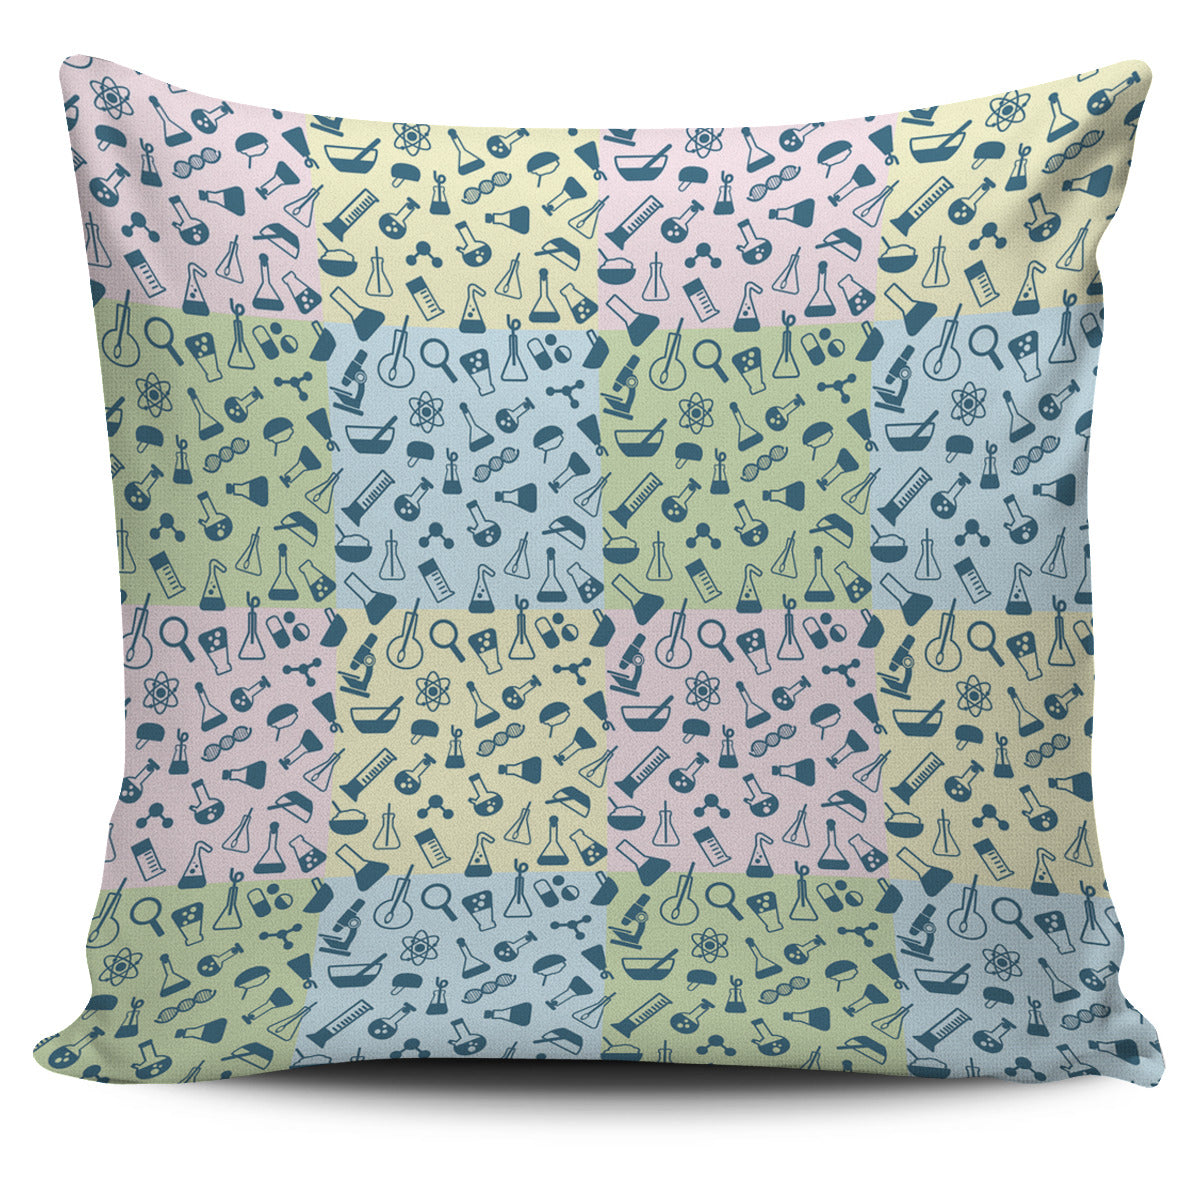 Science Symbols Pillow Cover